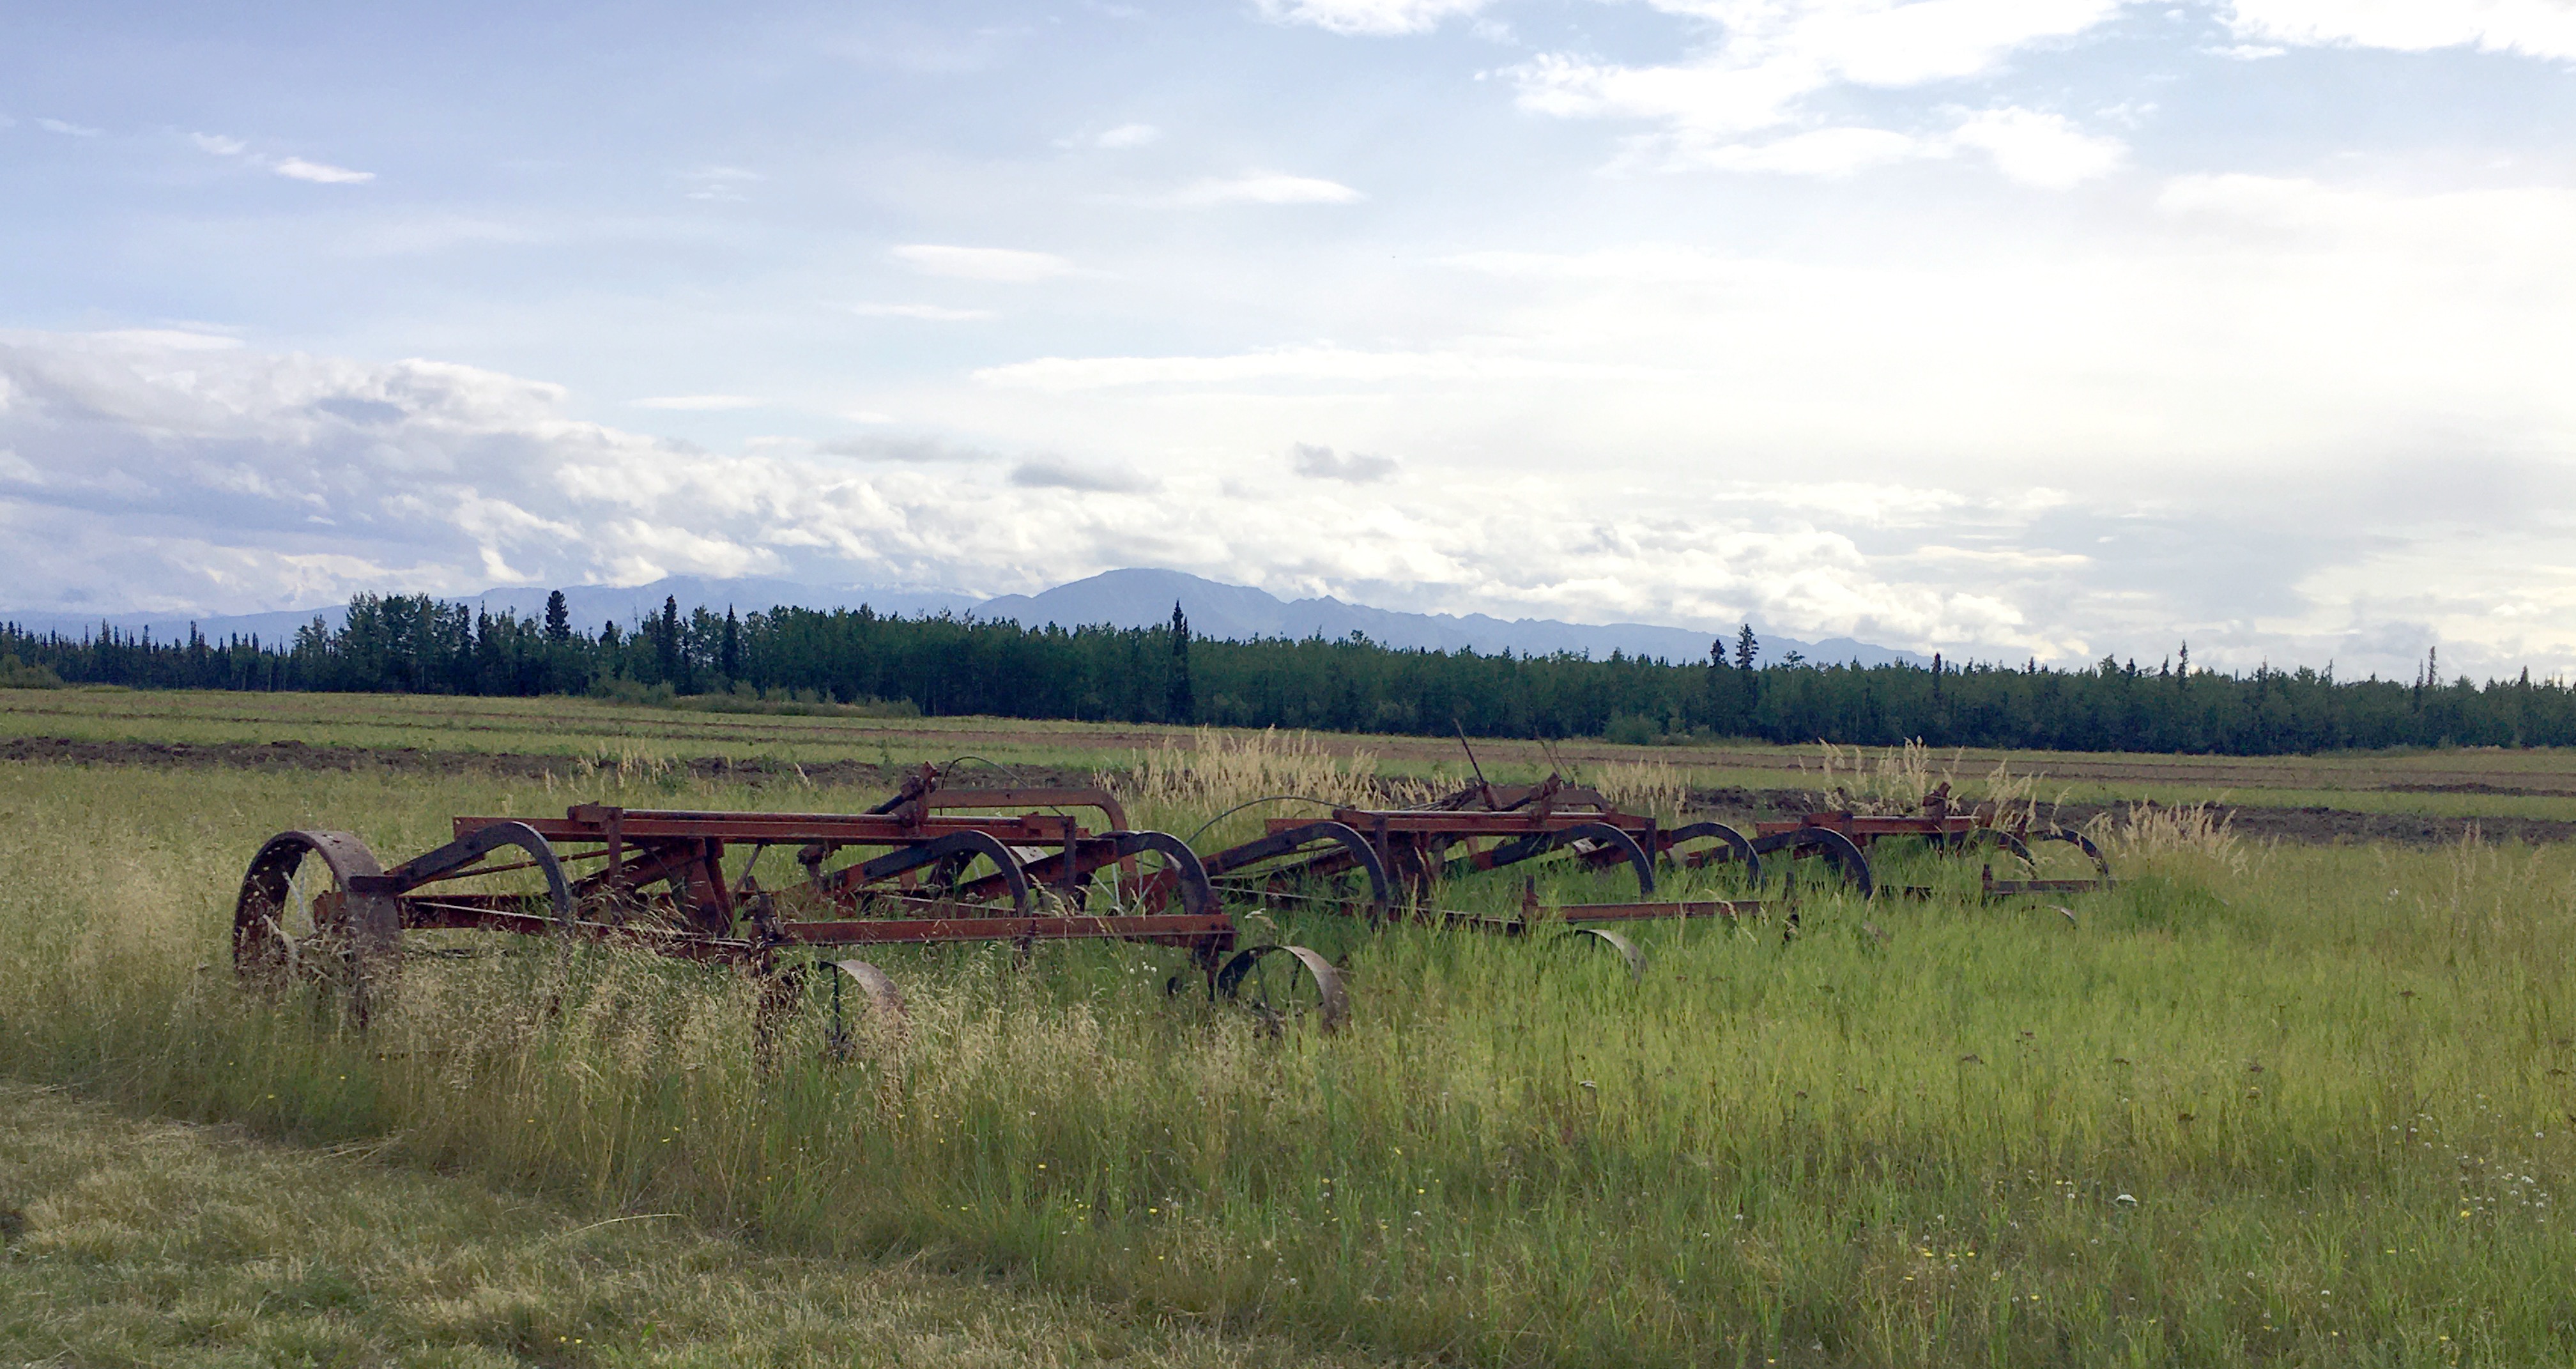 Old farm equipment lies in a grassy field with hills in the background.